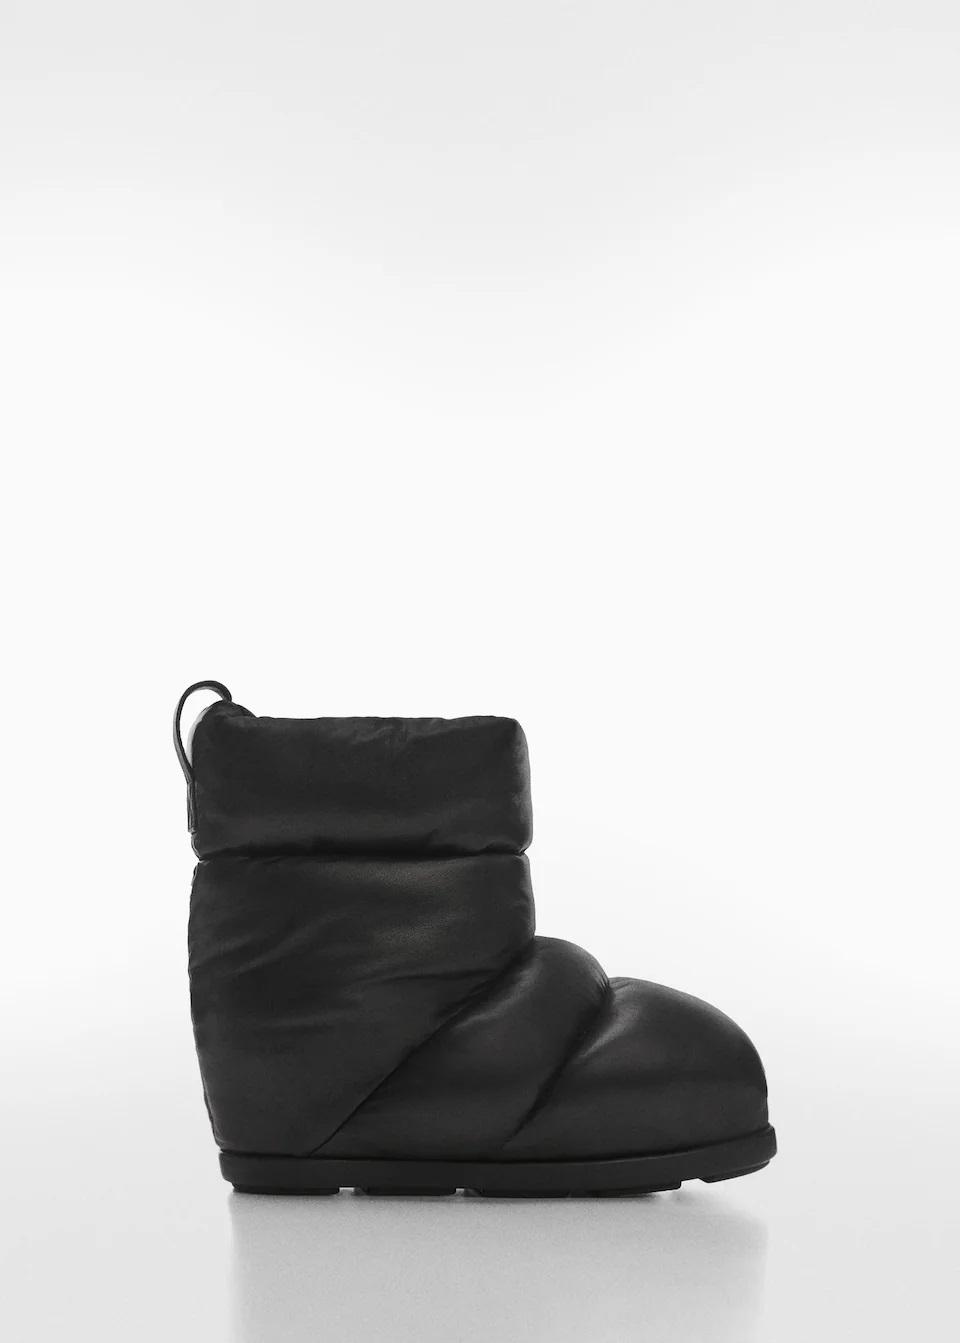 Stylish Winter Boots to Keep You Cosy All Season-Image 3